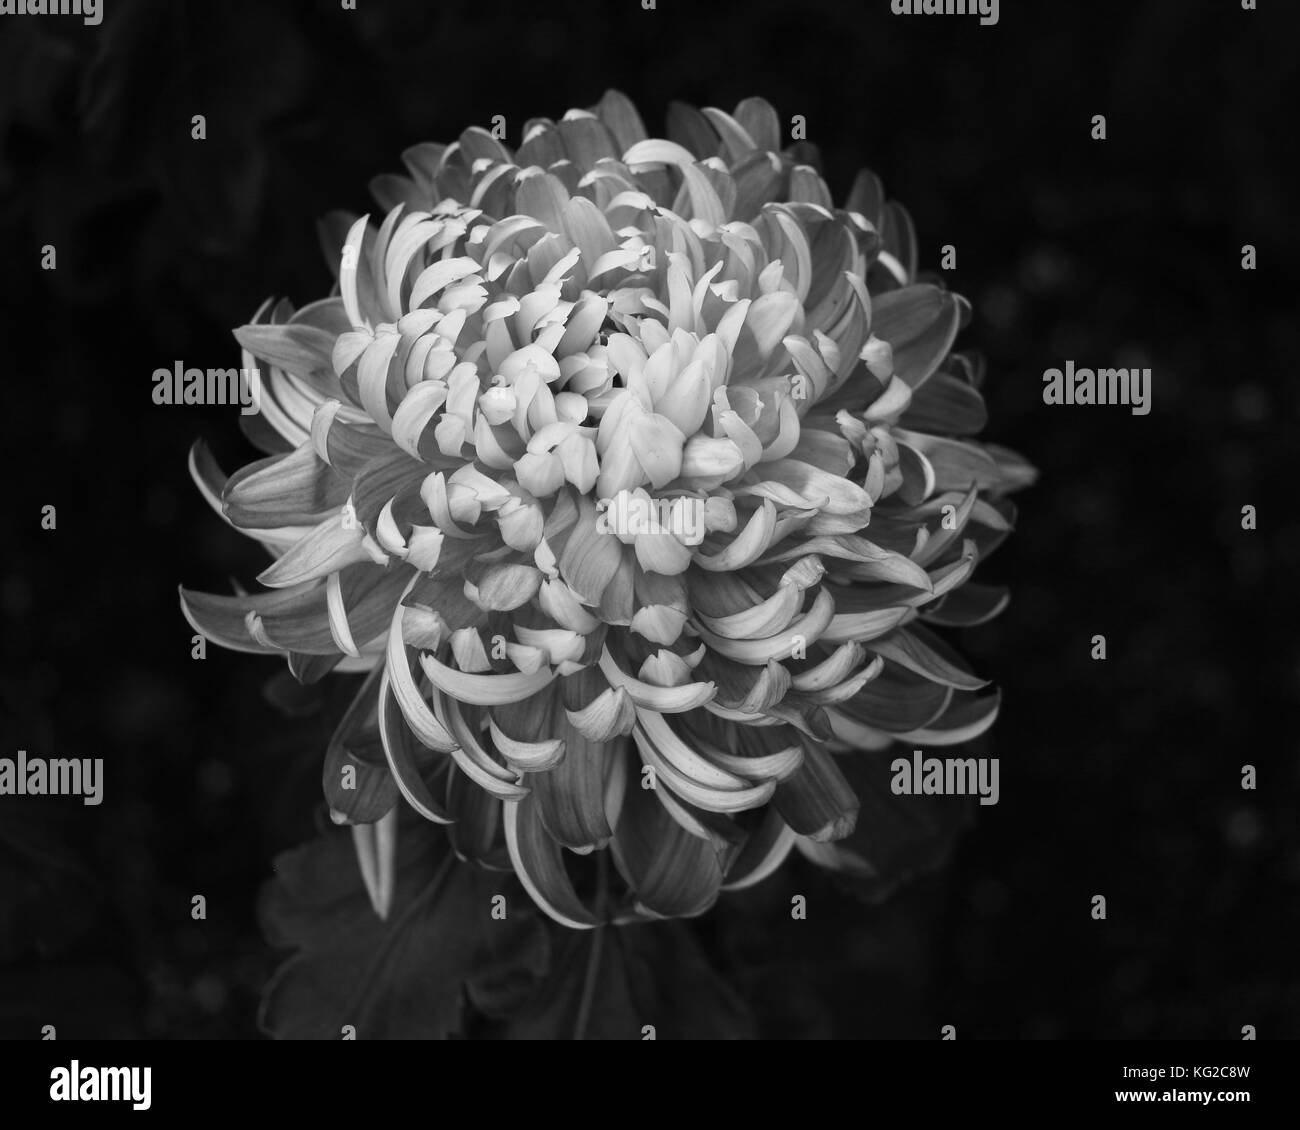 The black background of this singular chrysanthemum close up specimen, creates a striking contrast to the soft black and white petals in mid-bloom Stock Photo